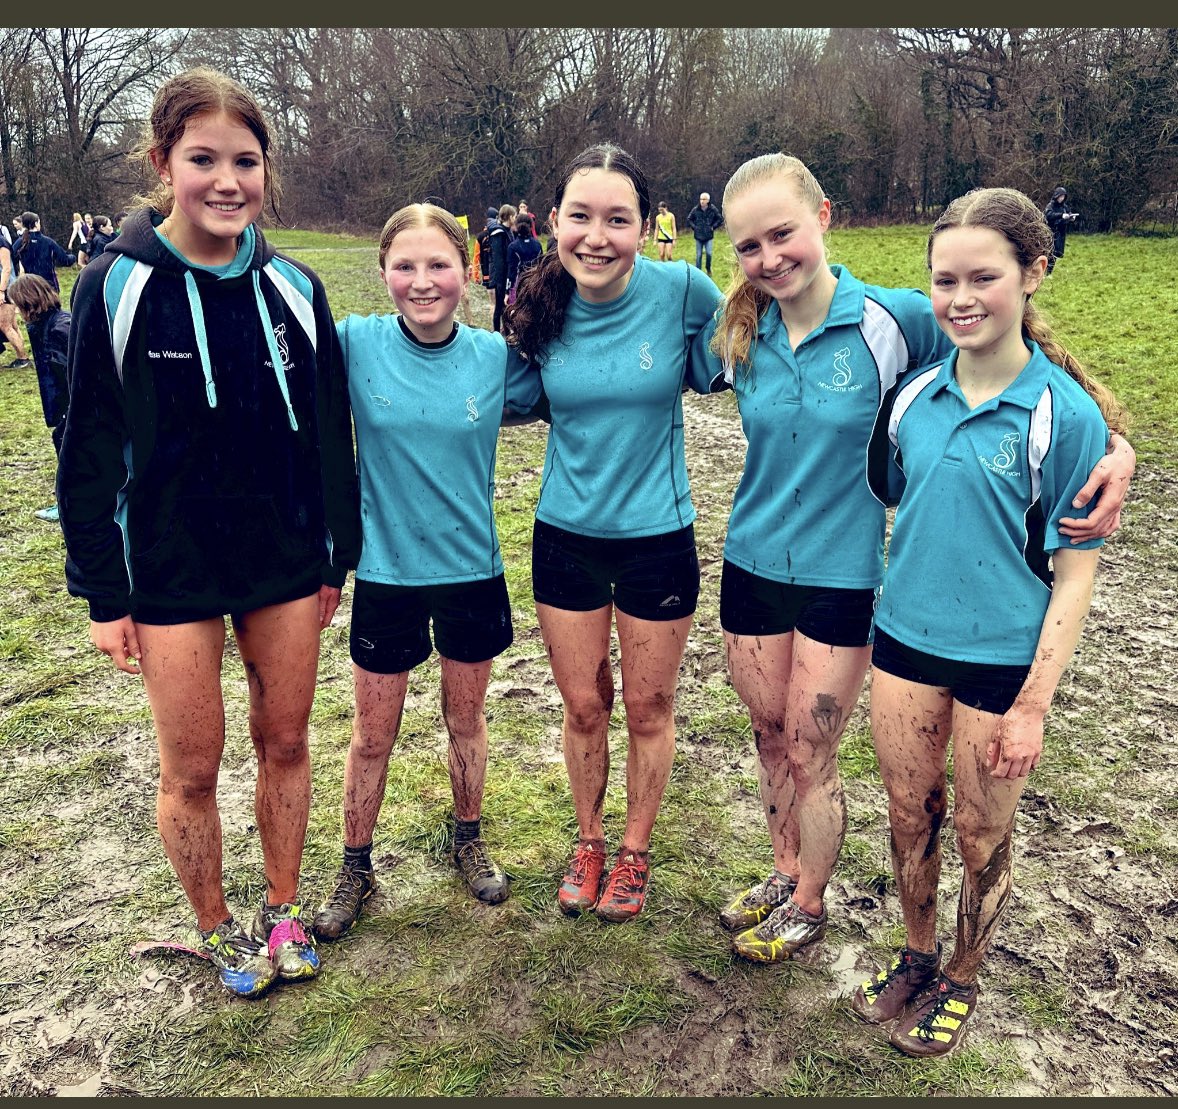 Senior Cross Country Runners Up! Well done girls! #2ndplace #teamteal